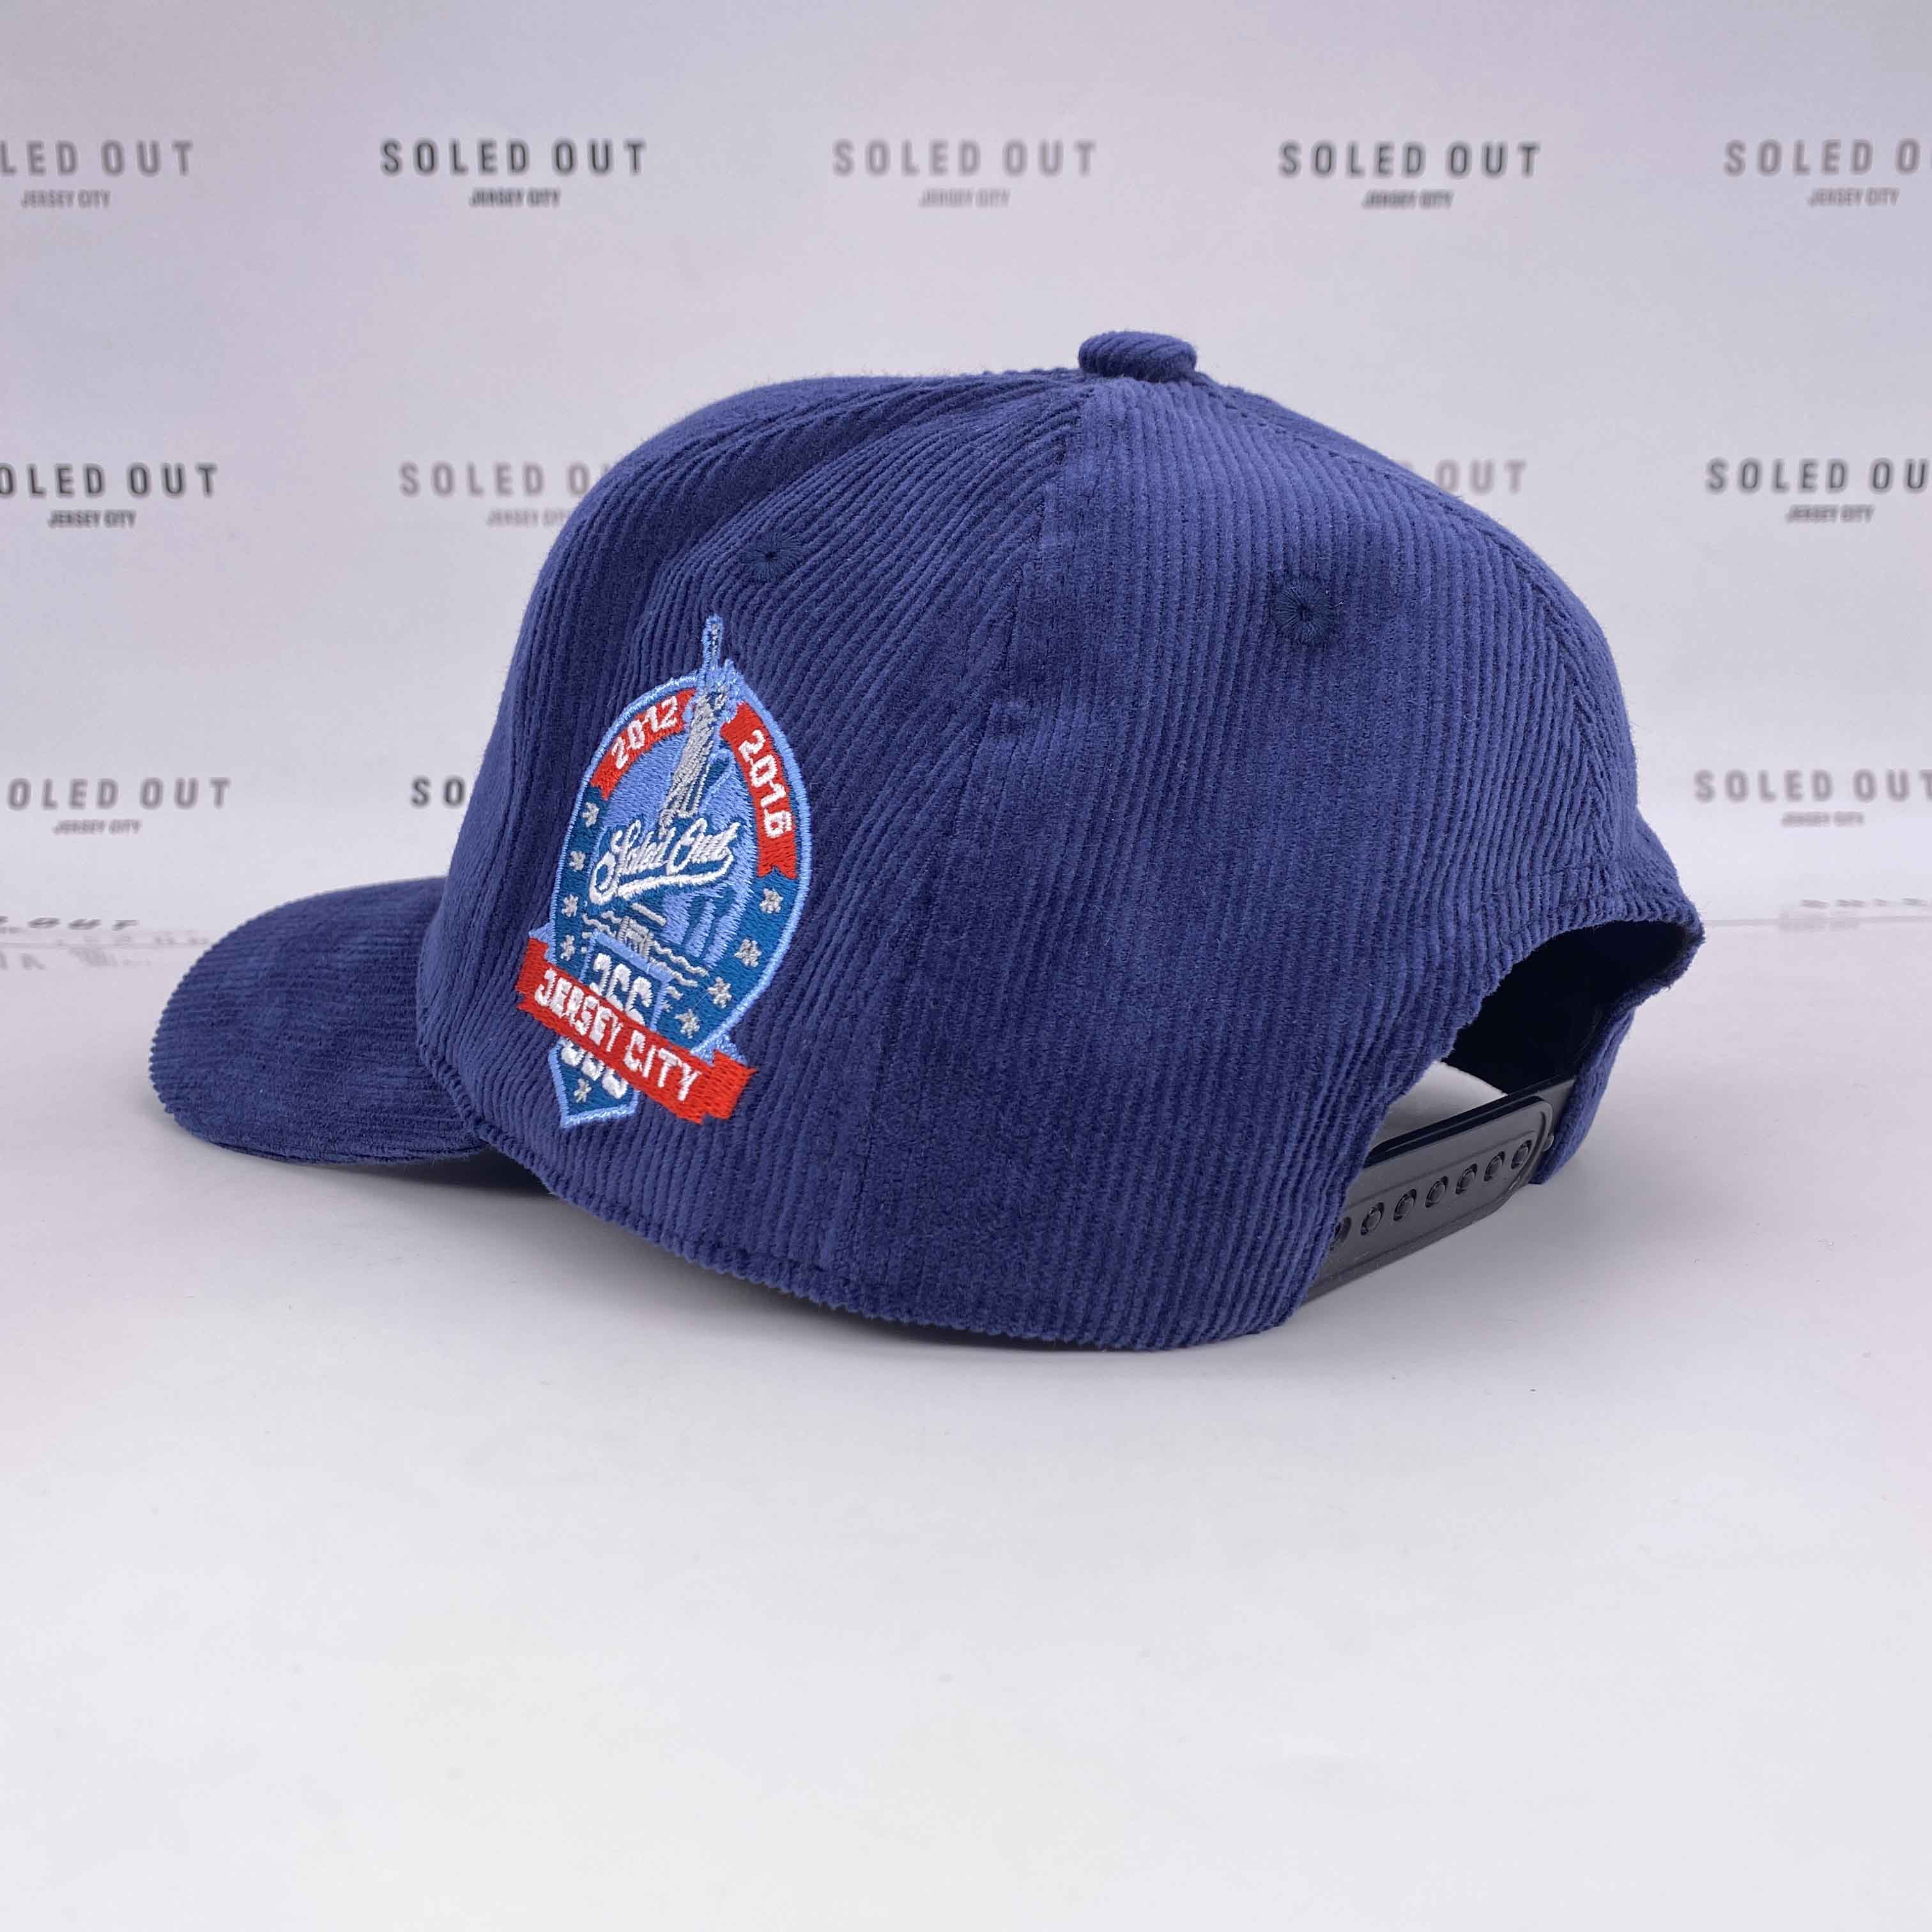 Soled Out Snapback "CORDUROY MIDNIGHT" 2022 New Size OS